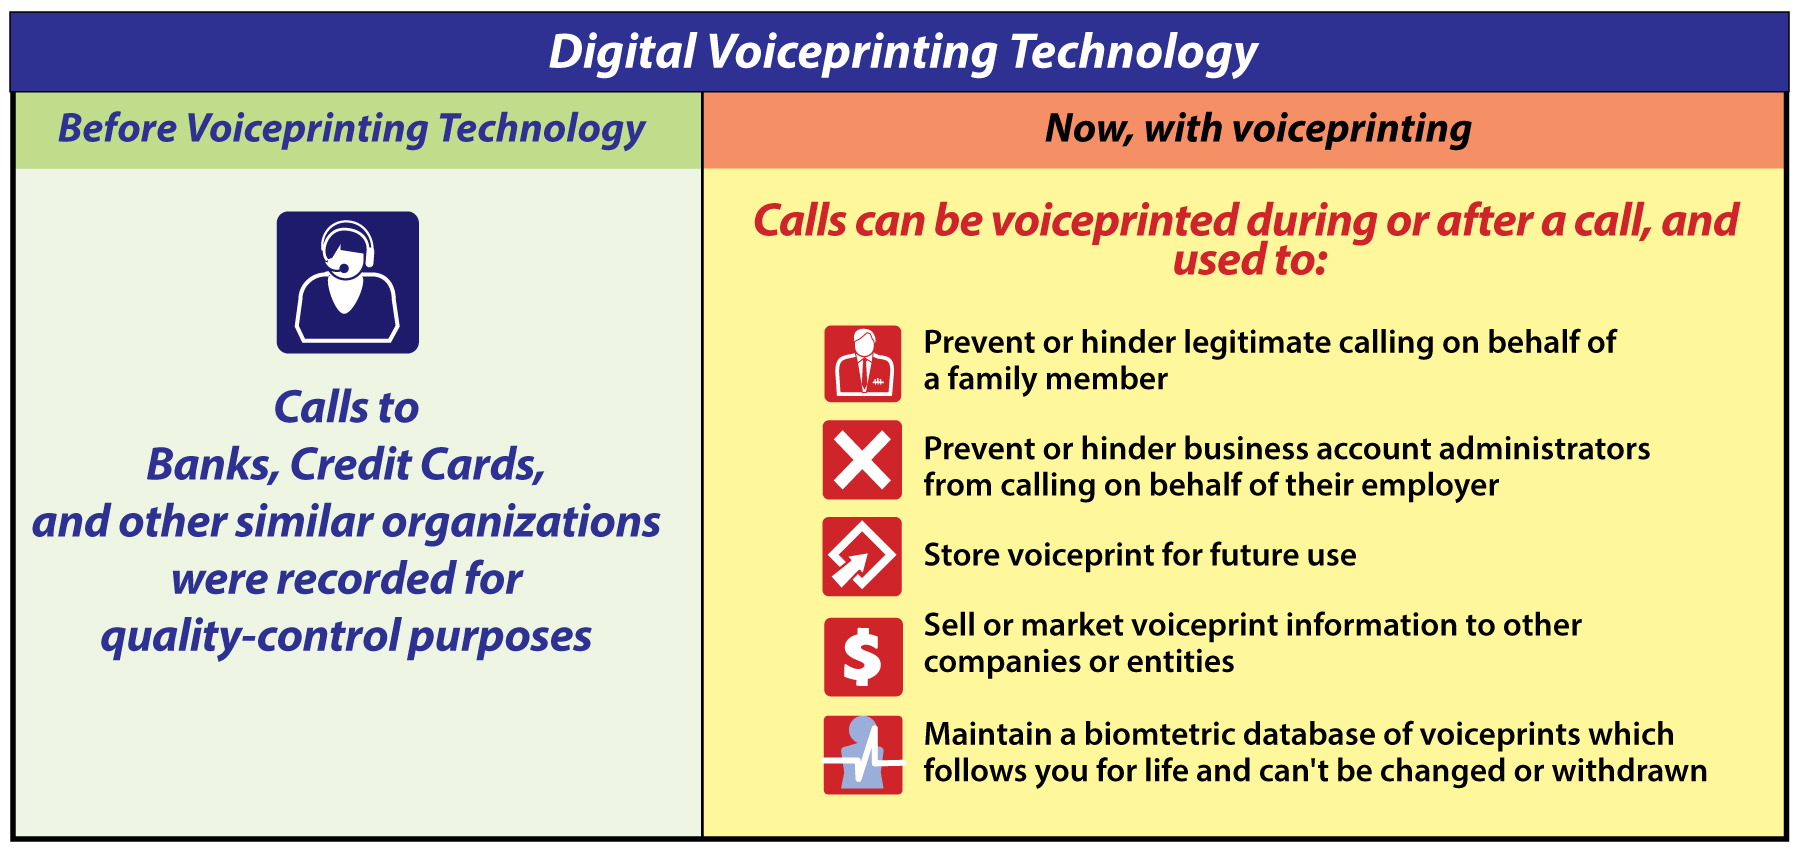 Voiceprint Authentication and Biometric Fingerprint chart 
differentiating between only recording customer calls and utilizing 
biometric voice fingerprinting to permanently store and utilize a 
caller's voice